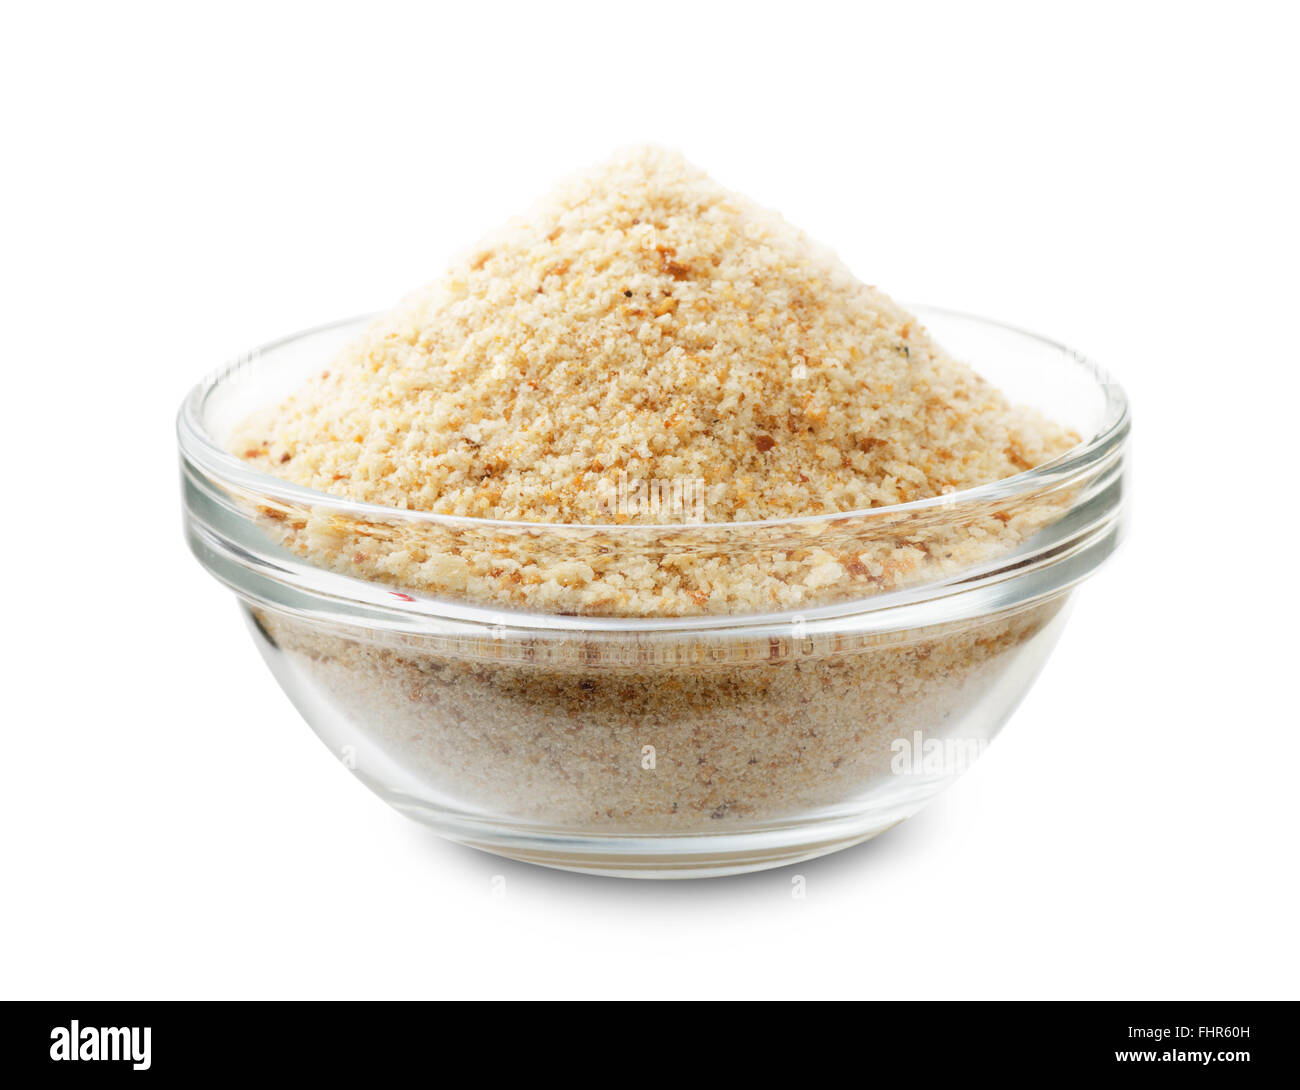 Bread crumbs in a glass bowl isolated on a white background Stock Photo